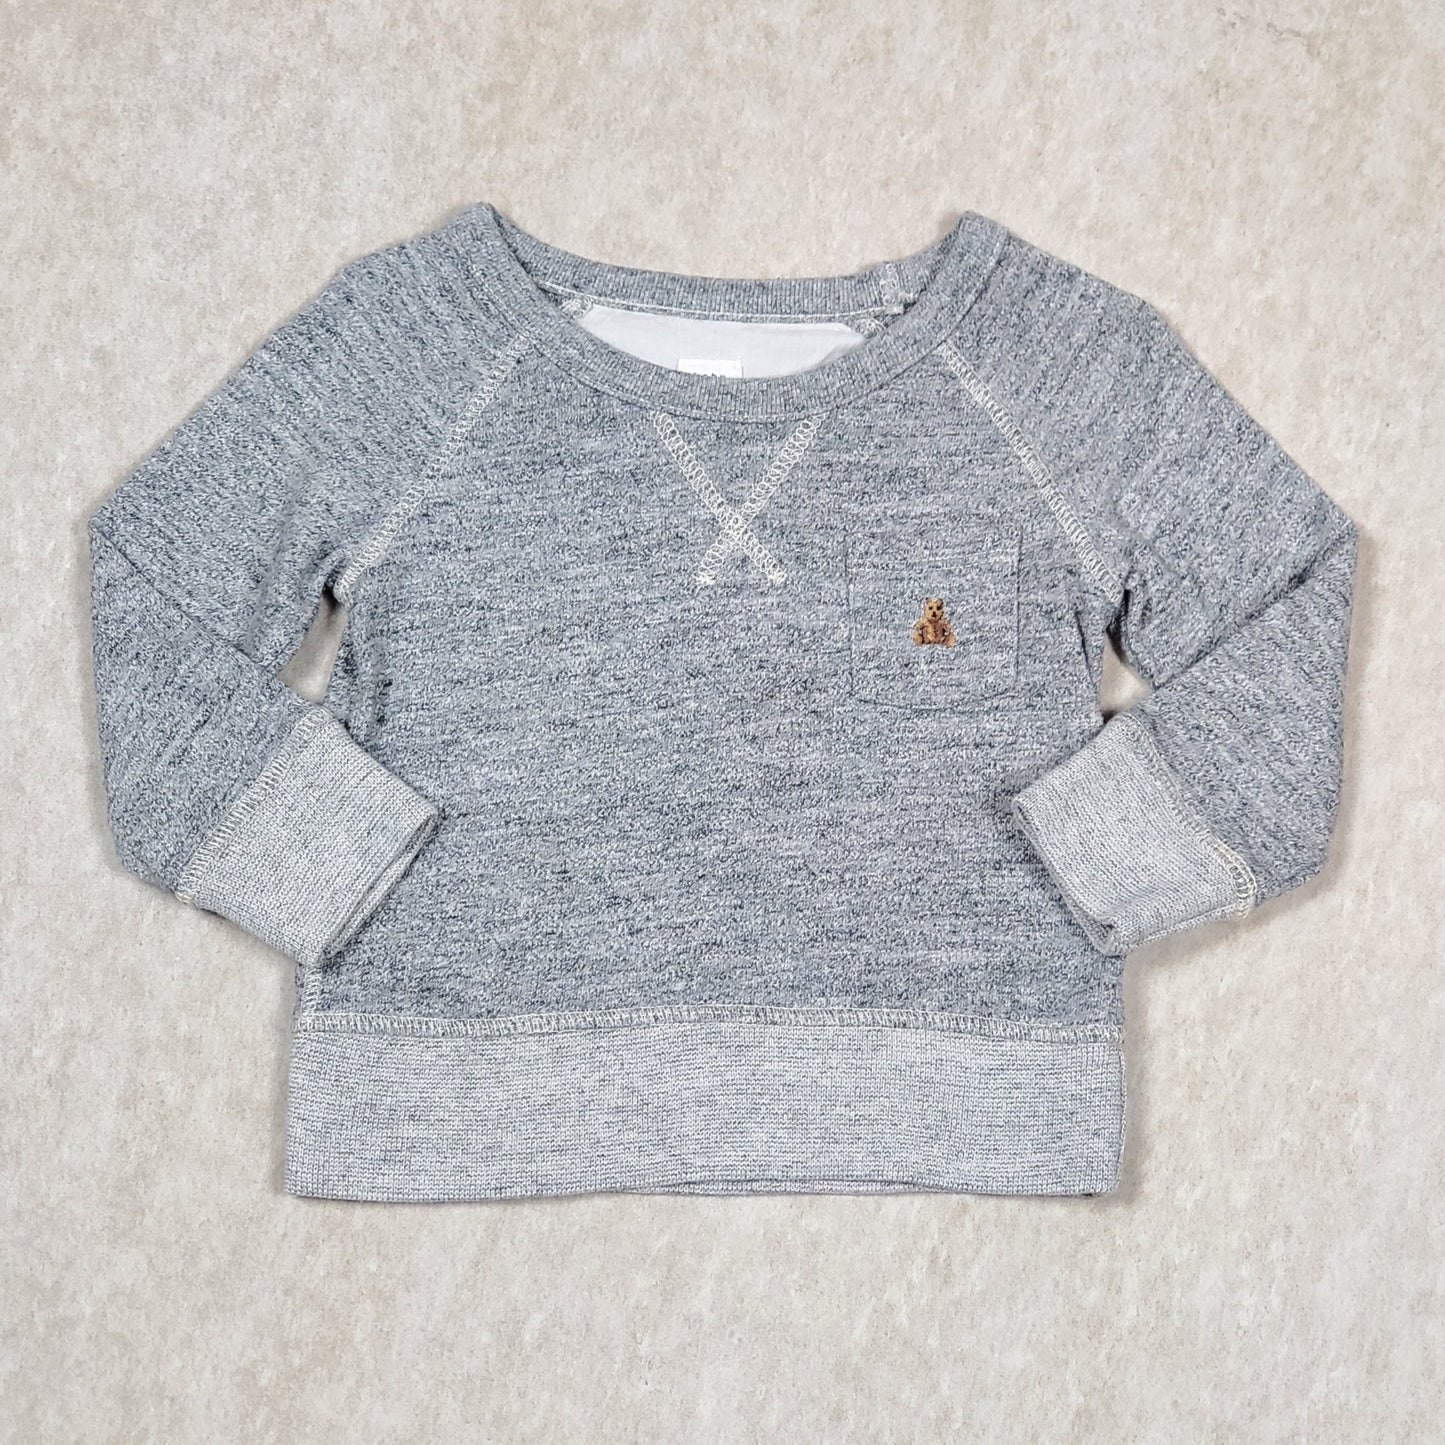 Baby Gap Boys Sweater Grey Marl Used, front